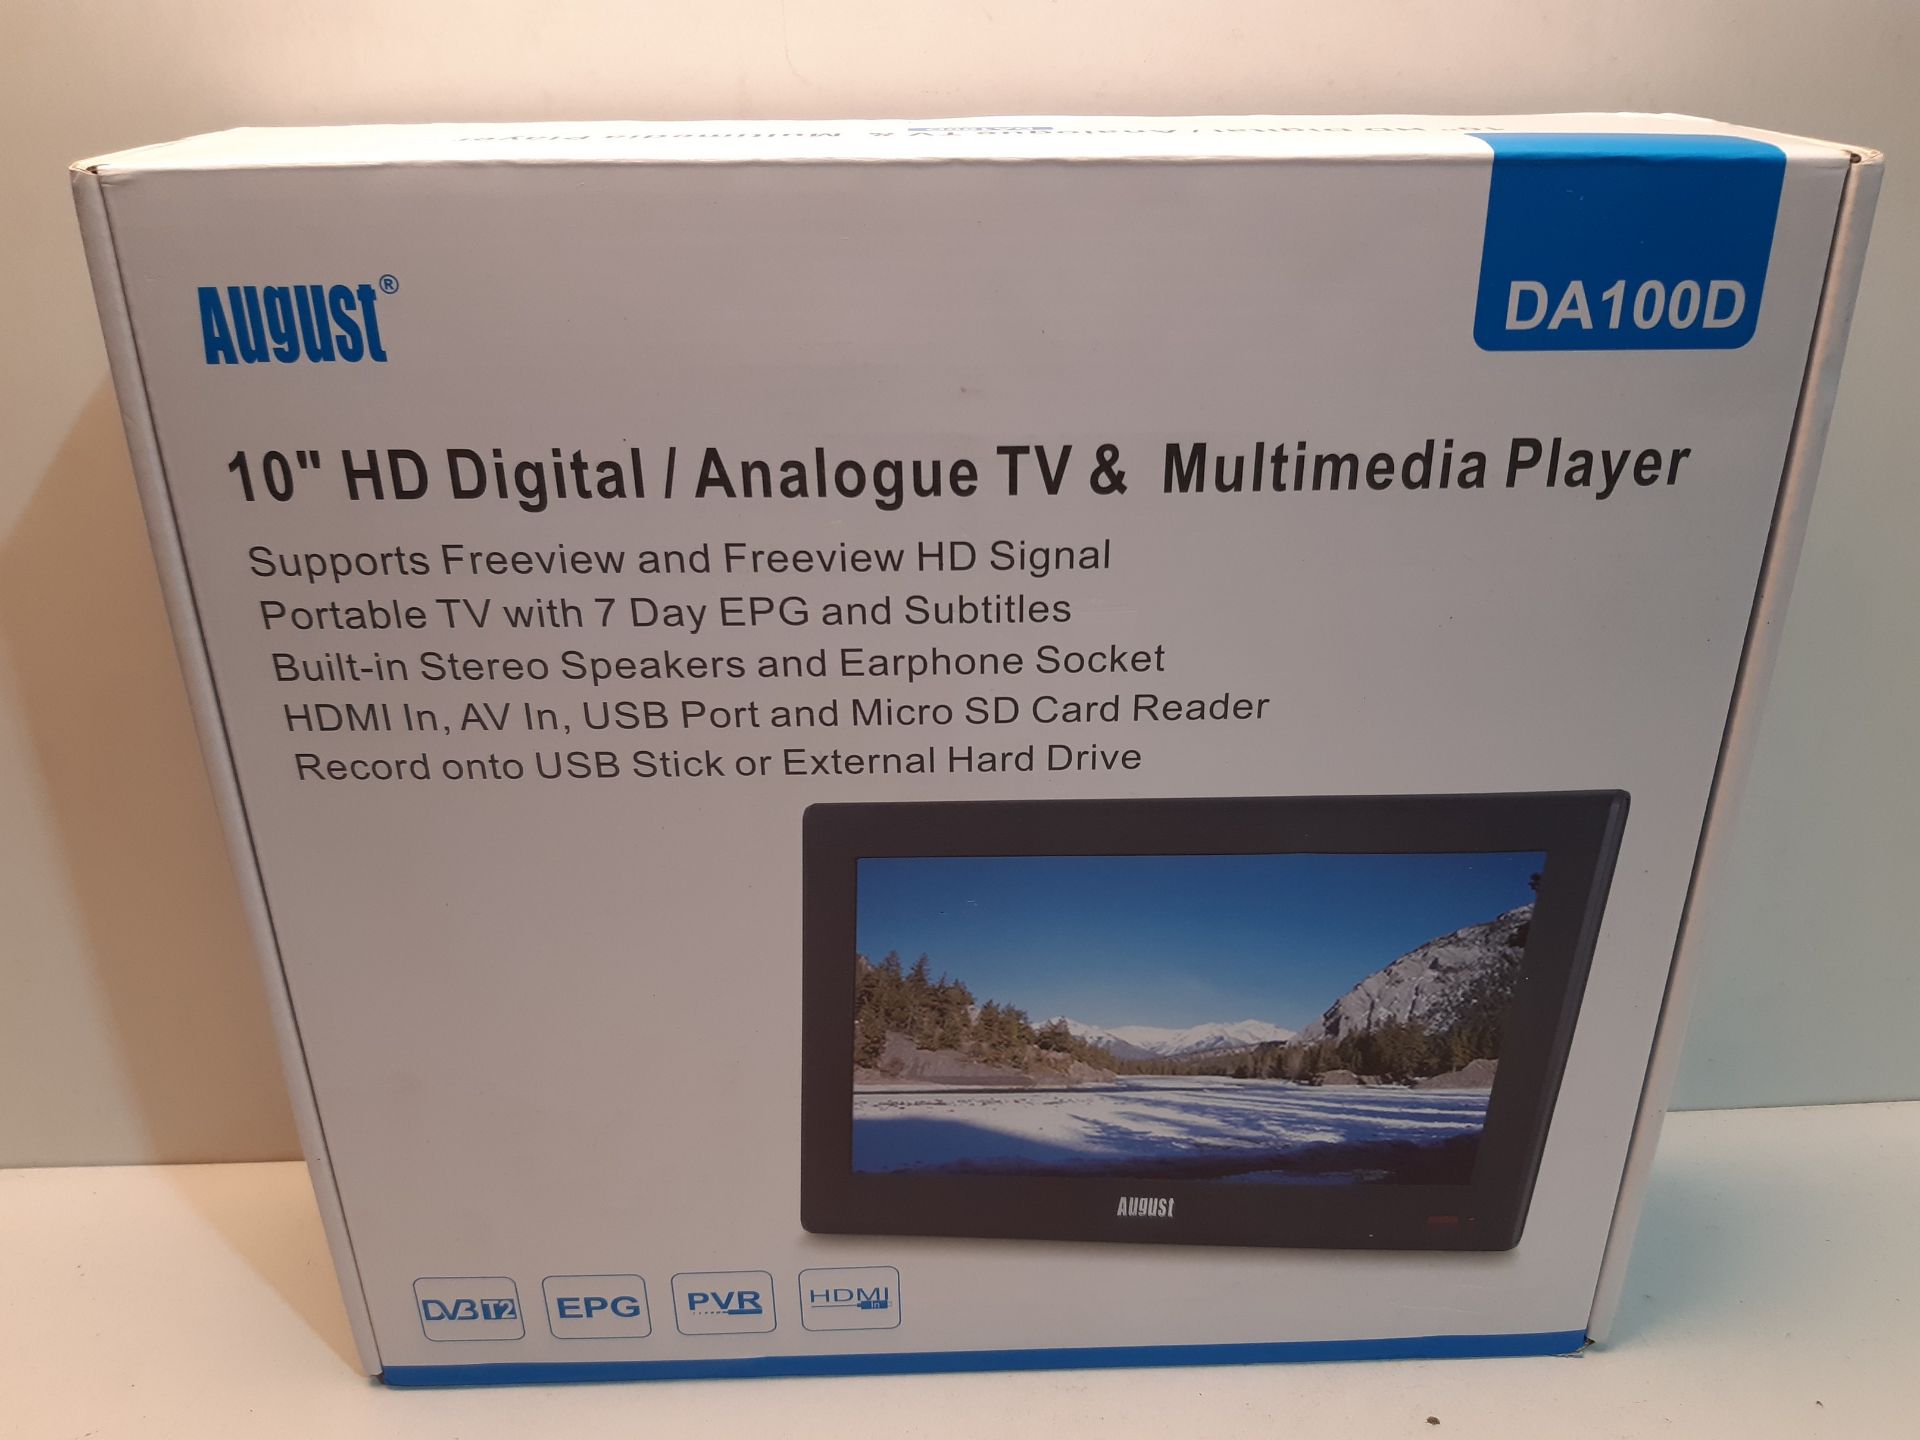 RRP £106.37 August DA100D - Image 2 of 2